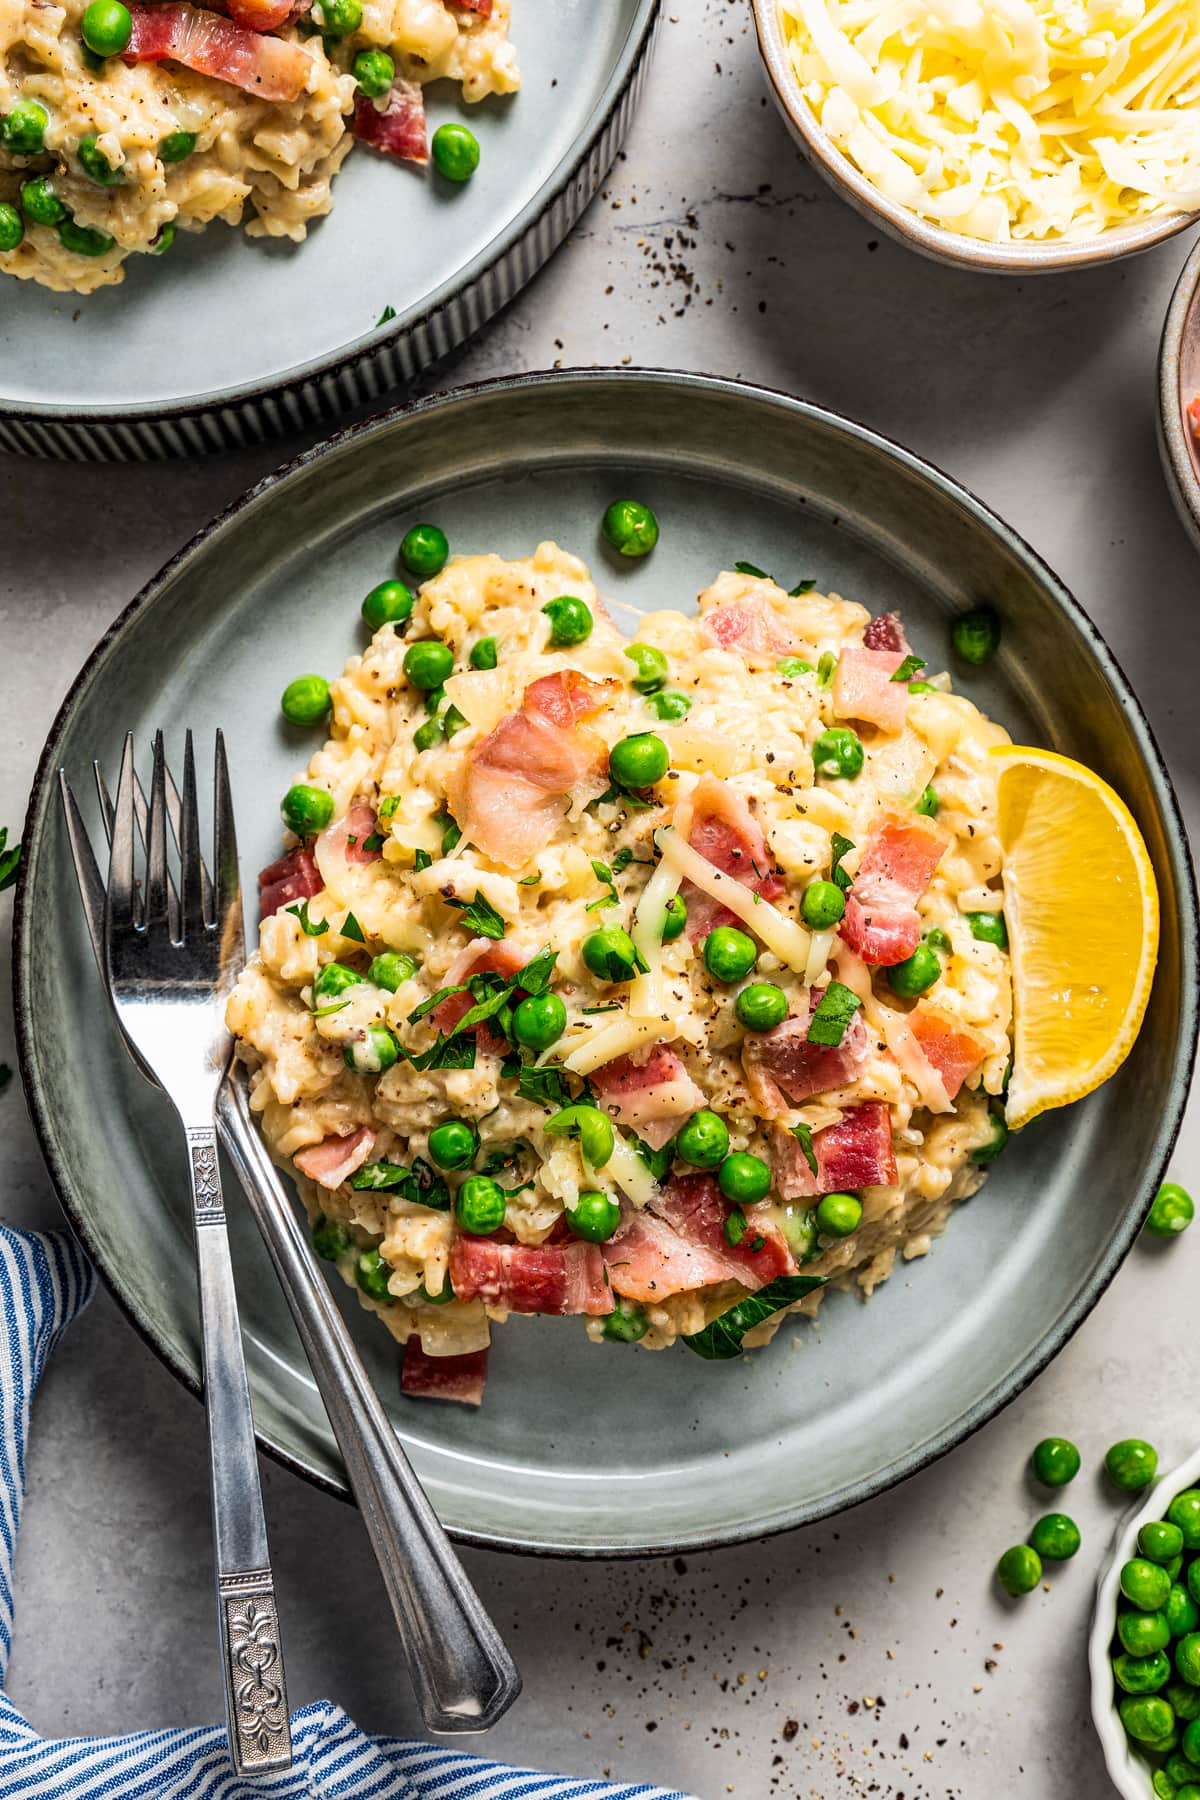 Rice served in a bowl and garnished with bacon, peas, and slice of lemon.